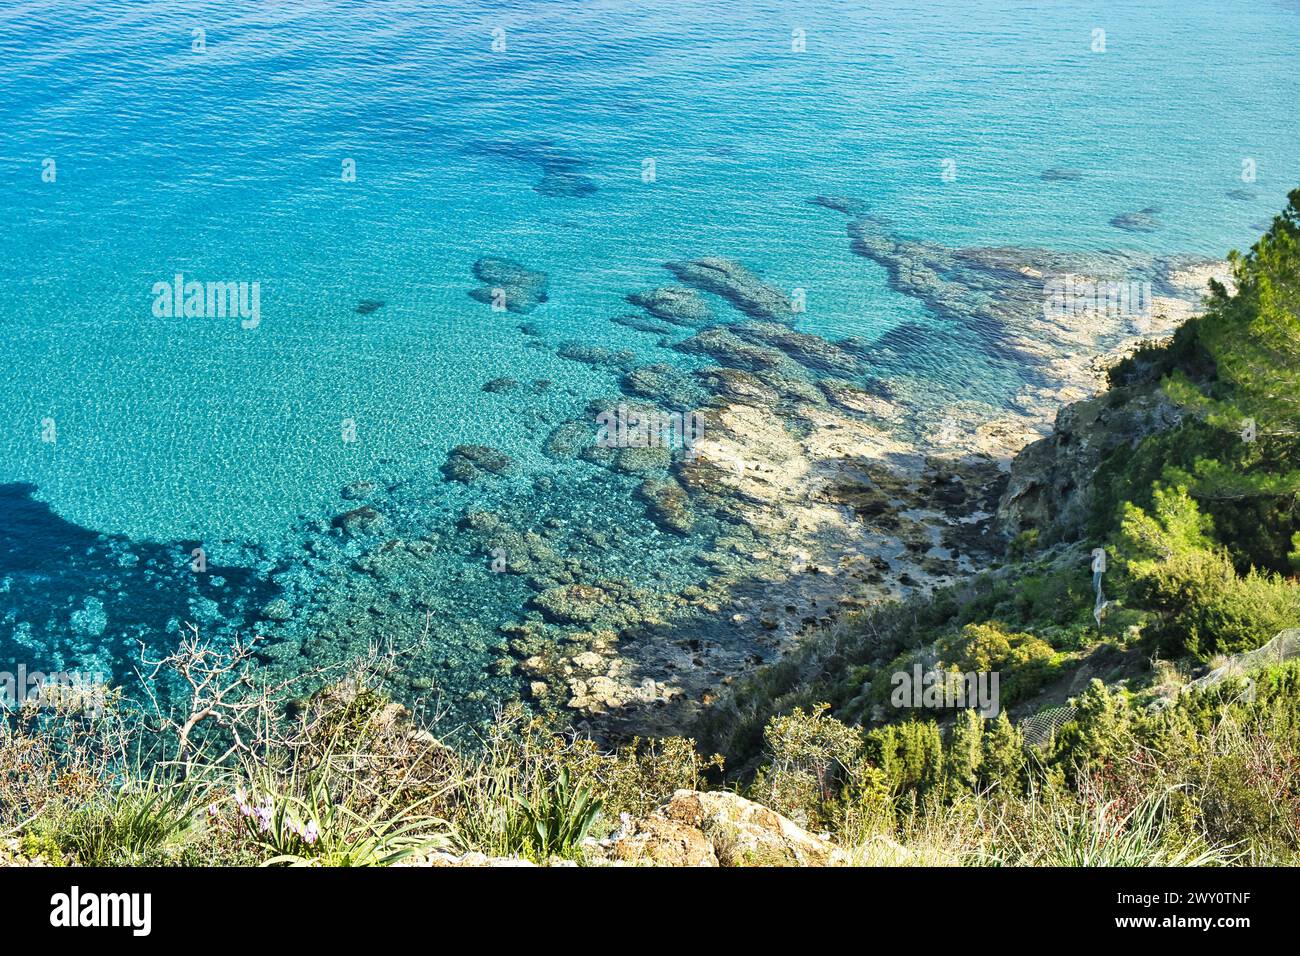 Crystal clear water of the Mediterranean at the coast at the Bath of Aphrodite, Akamas Peninsula, Paphos district, Cyprus Stock Photo